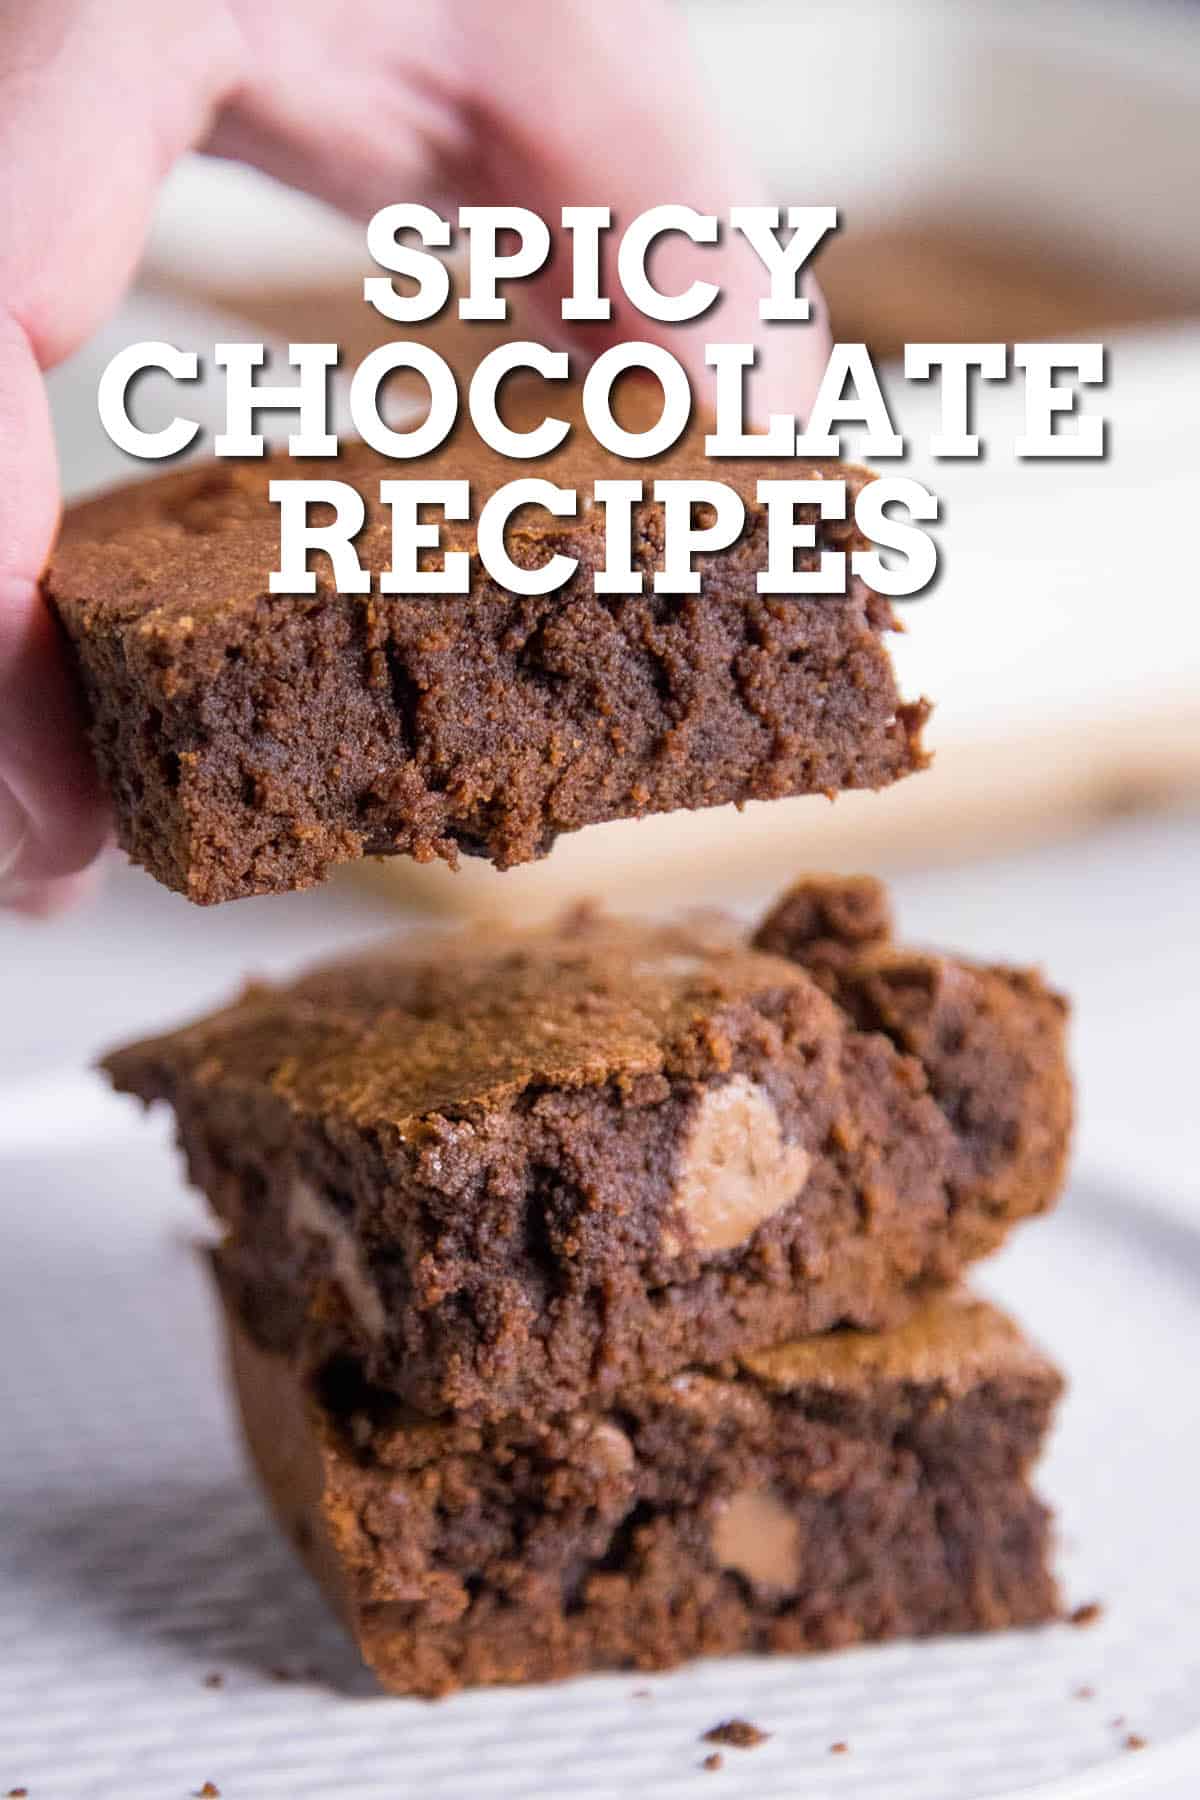 Spicy Chocolate Recipes